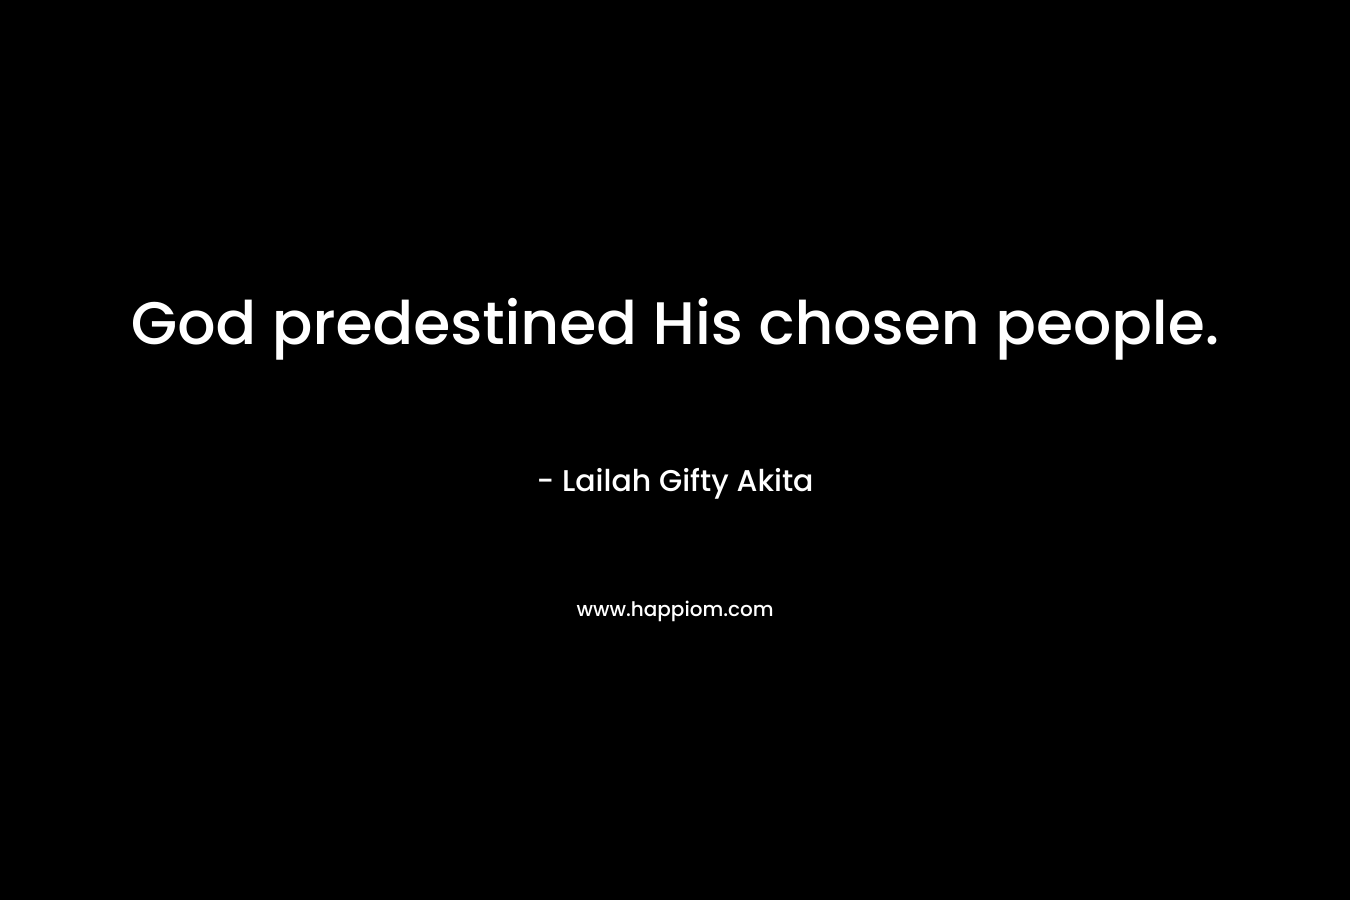 God predestined His chosen people. – Lailah Gifty Akita